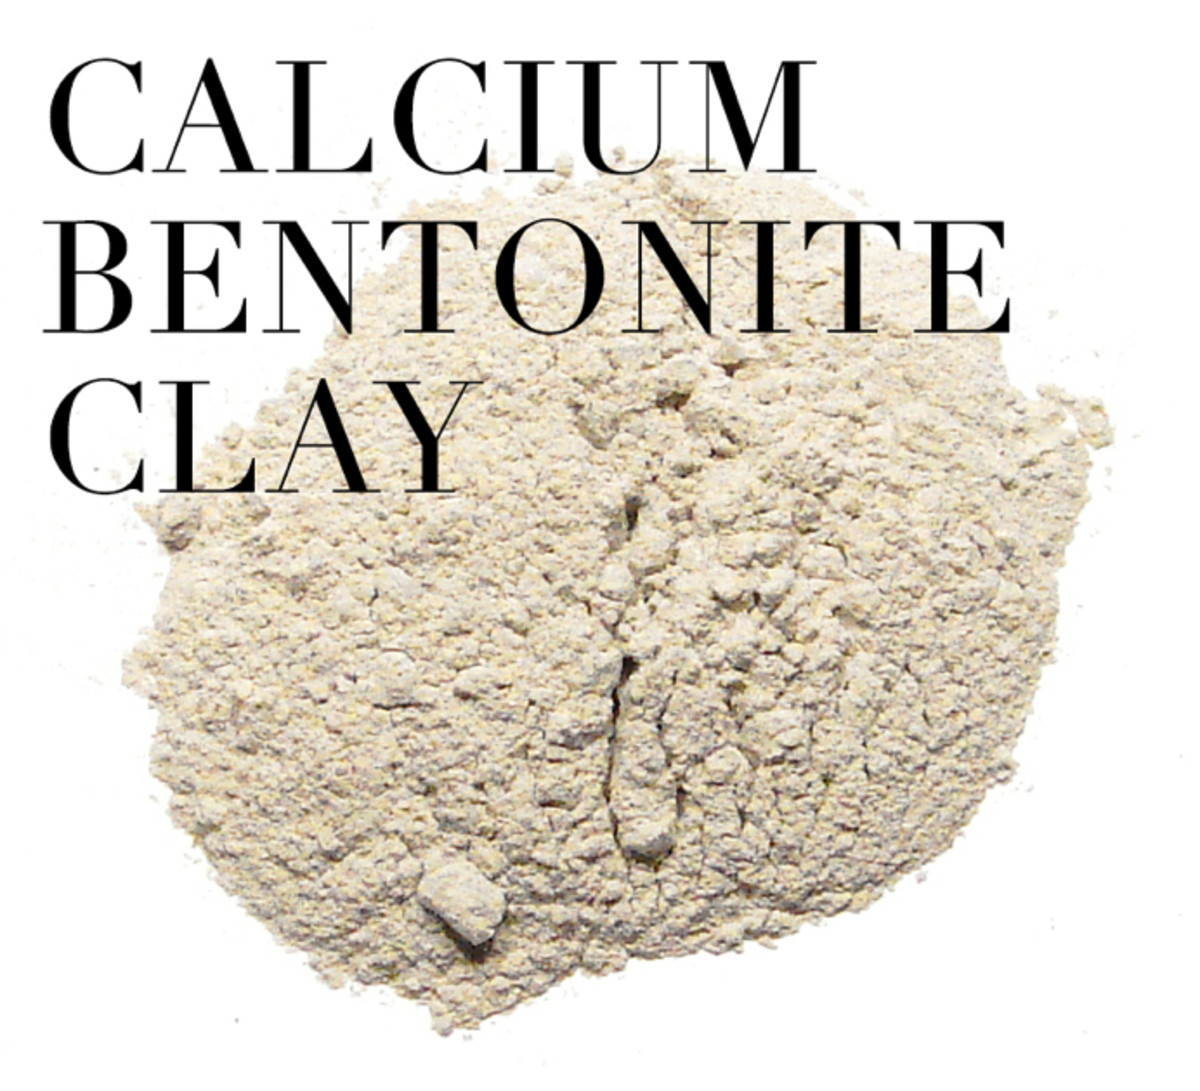 A bentonite clay mask can surface impurities lurking beneath your skin.